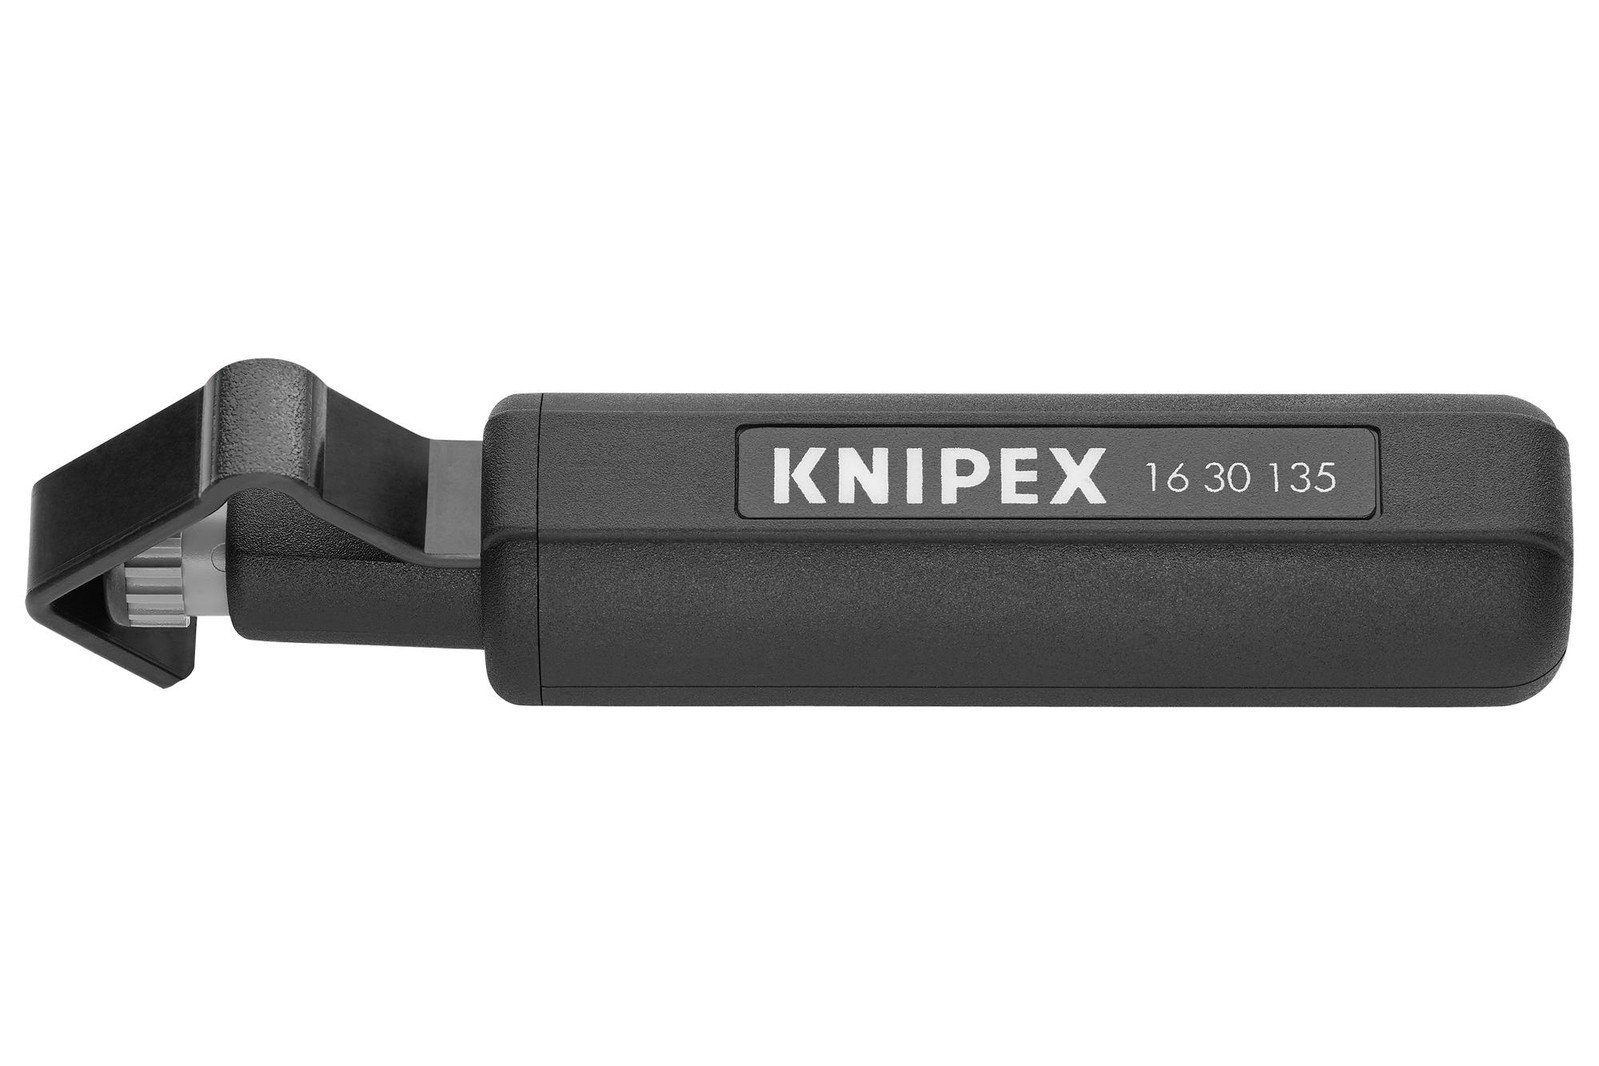 Knipex 16 30 135 Sb Cable Stripper, 4.5-28.5mm